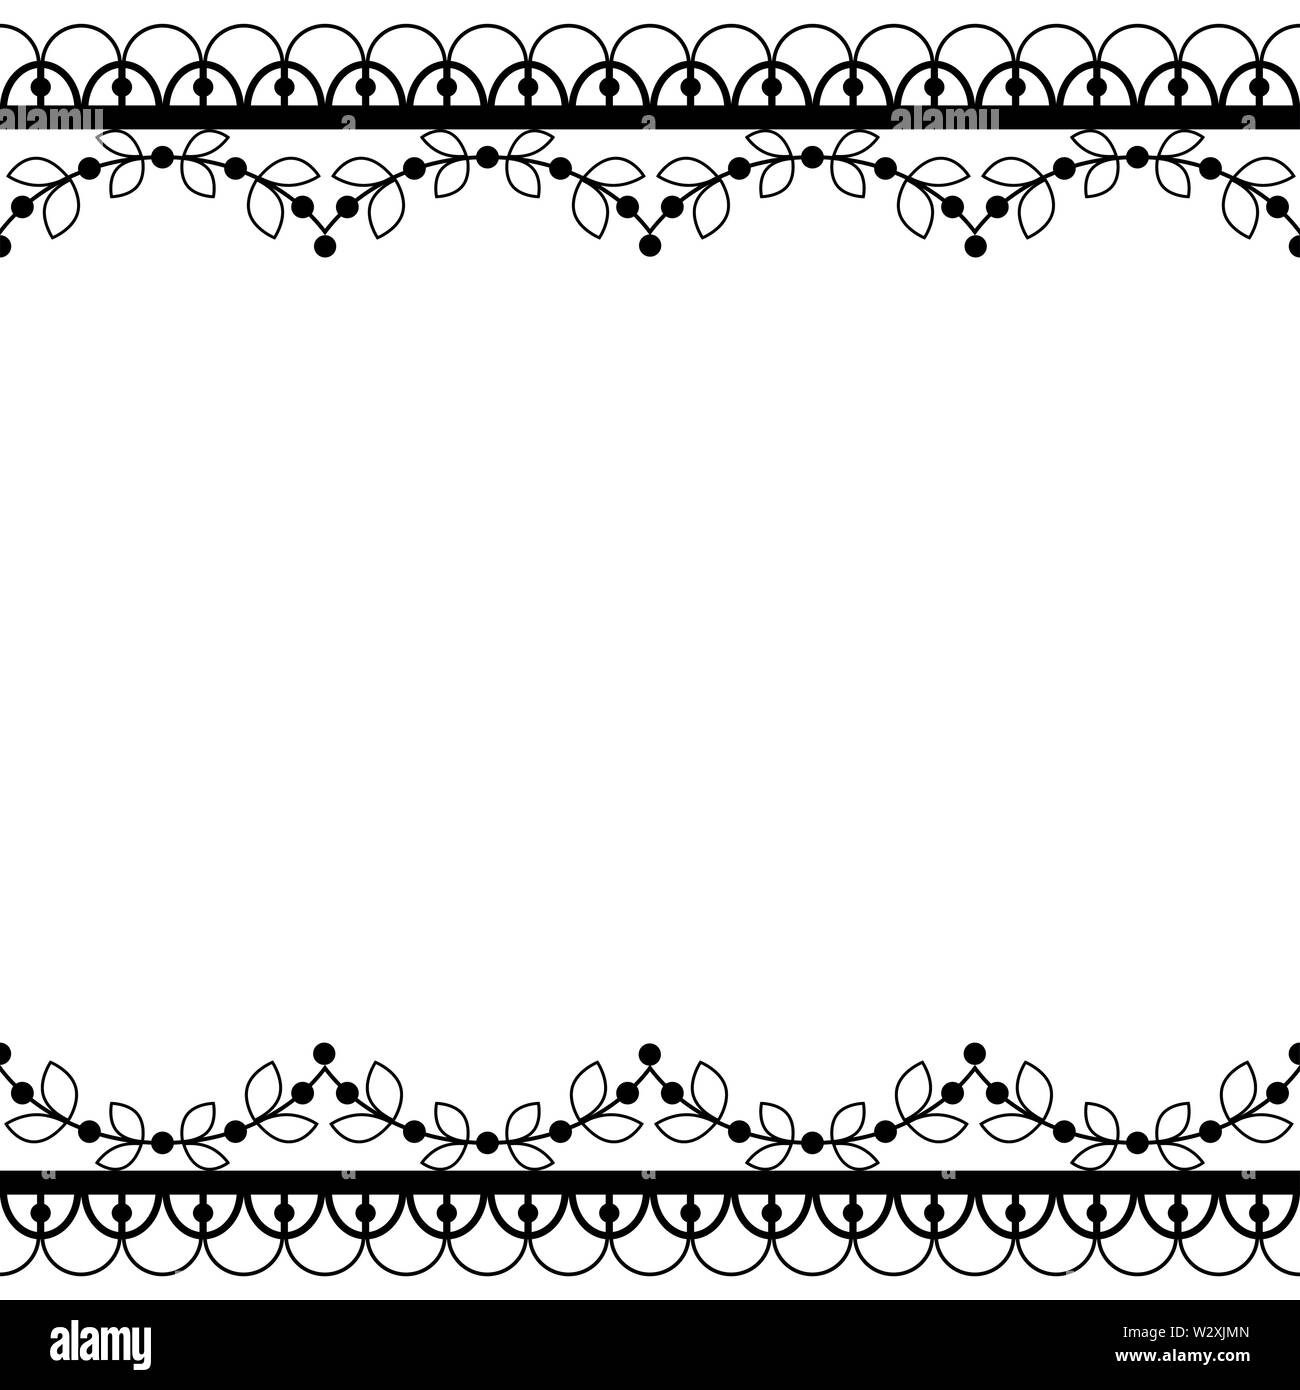 Retro lace pattern vector greeting card, wedding or birthday party invitation, black and white ornamental border or frame design Stock Vector